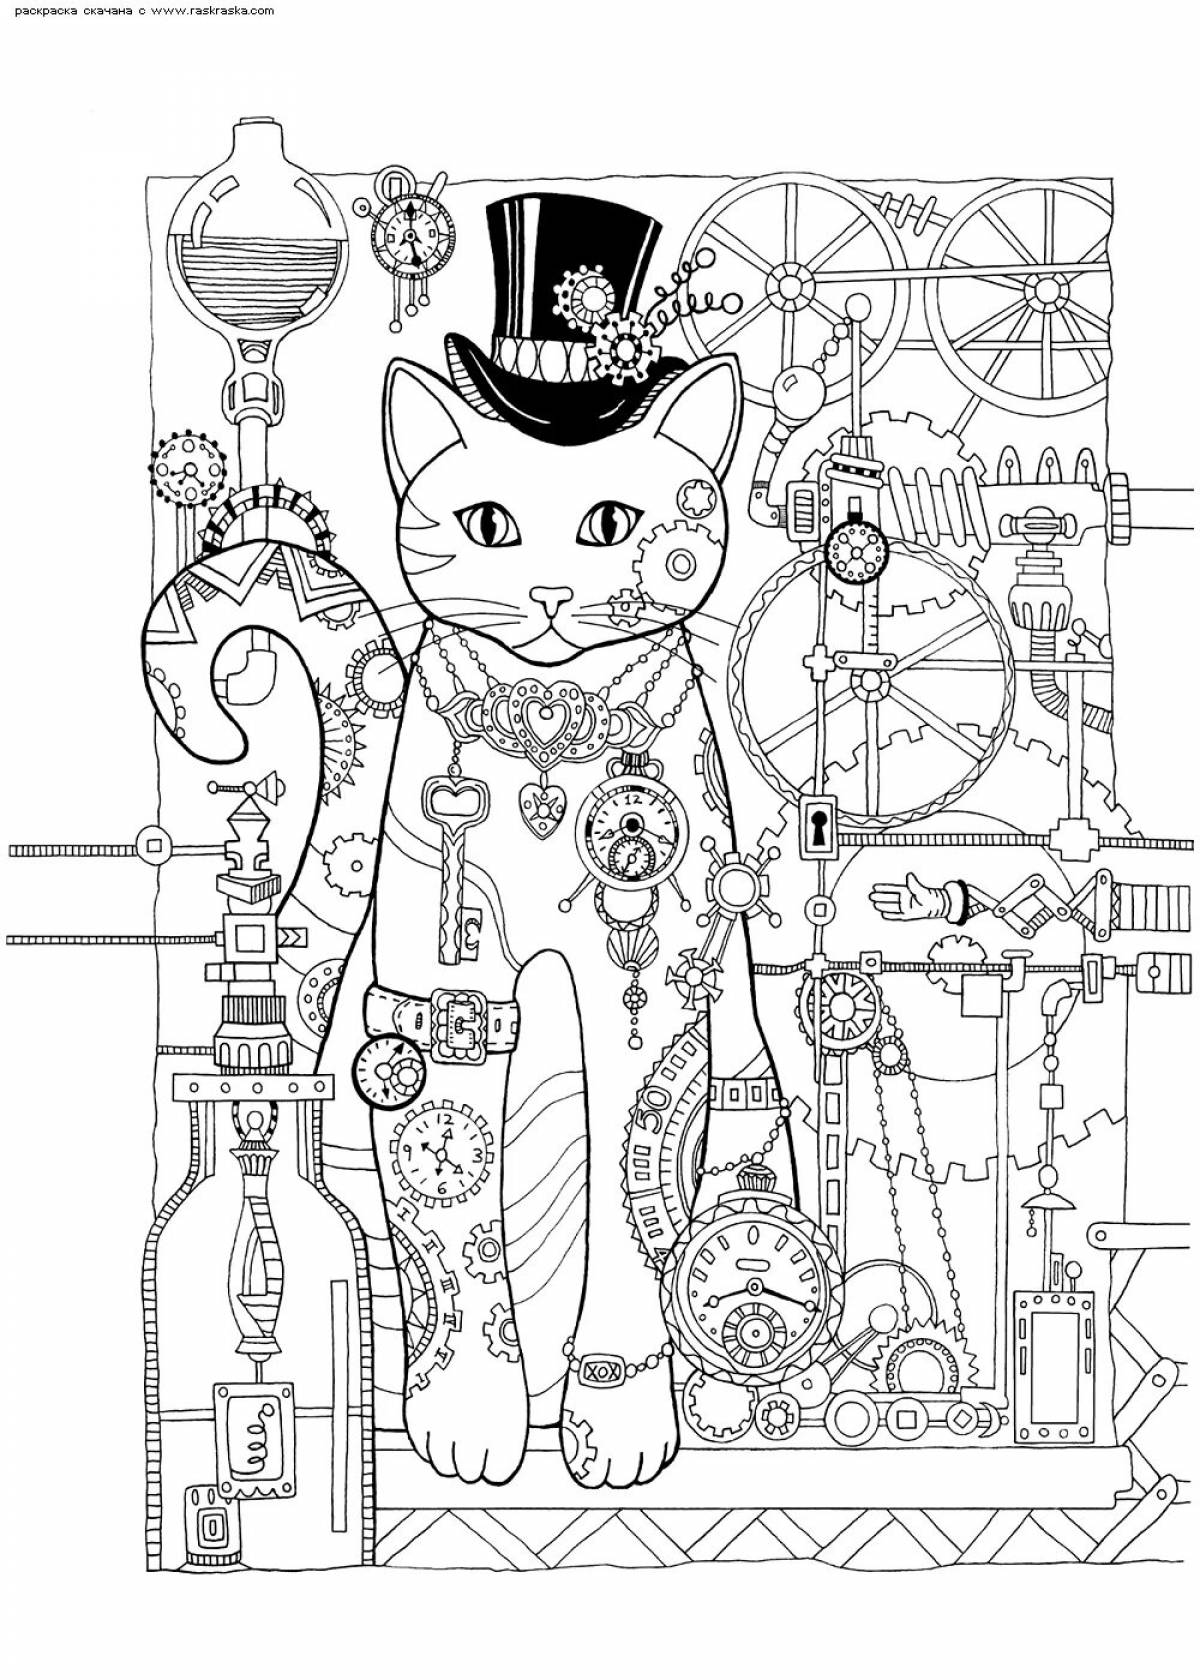 Funny steampunk coloring book